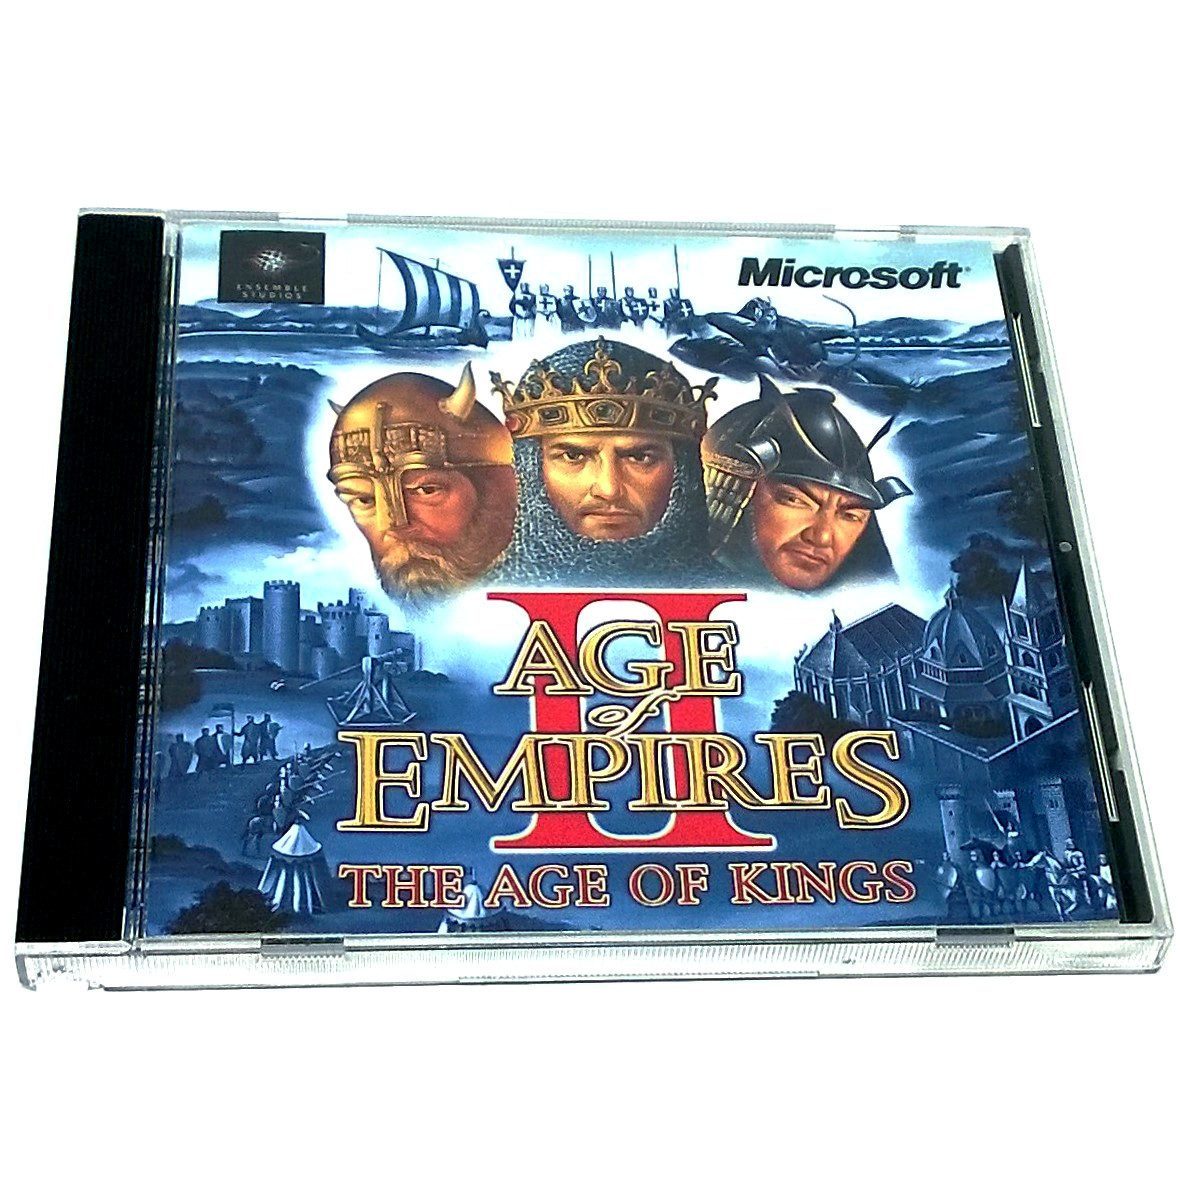 Age of Empires II: The Age of Kings for PC CD-ROM - Front of case